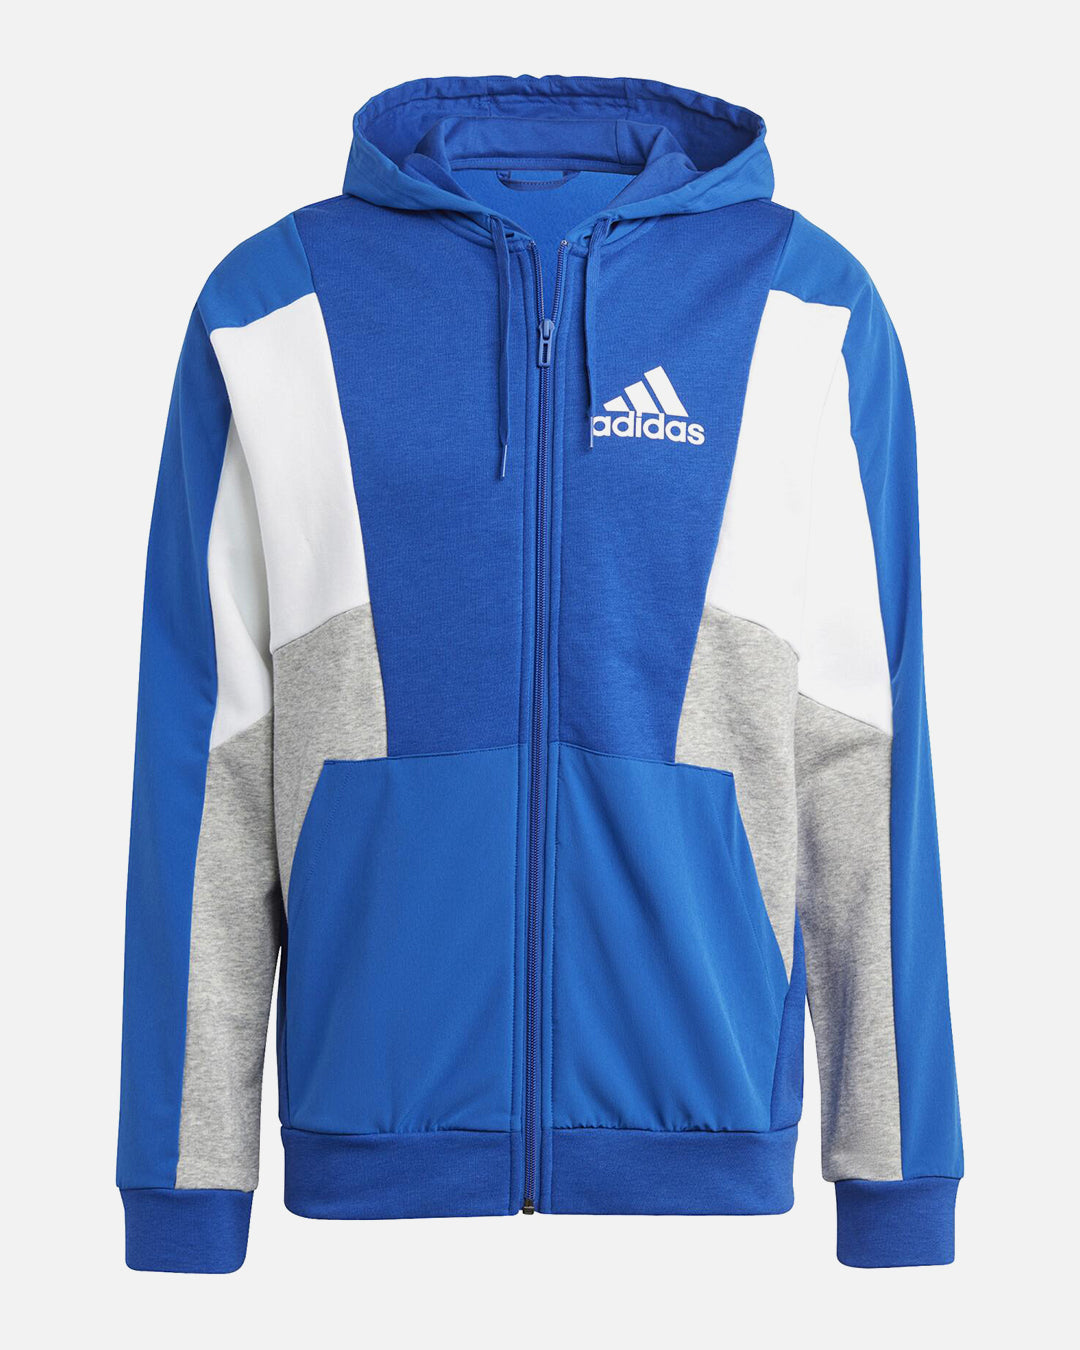 Adidas Essentials Colorblock Hooded Jacket - Blue/Grey/White